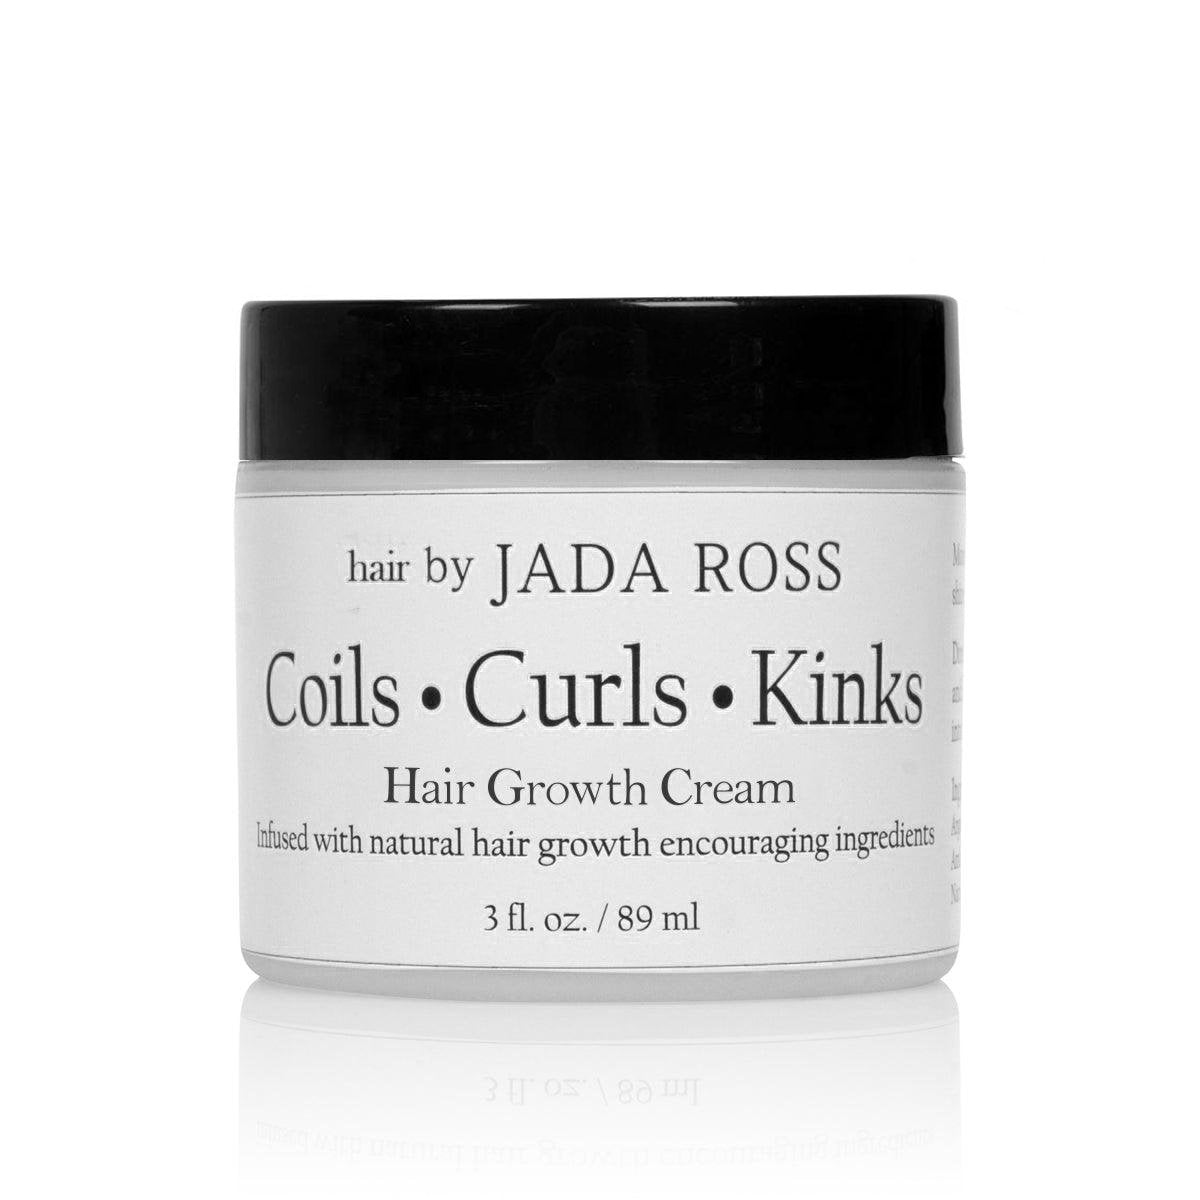 Coils, Curls and Kinks natural hair growth cream for black girls and black women. 